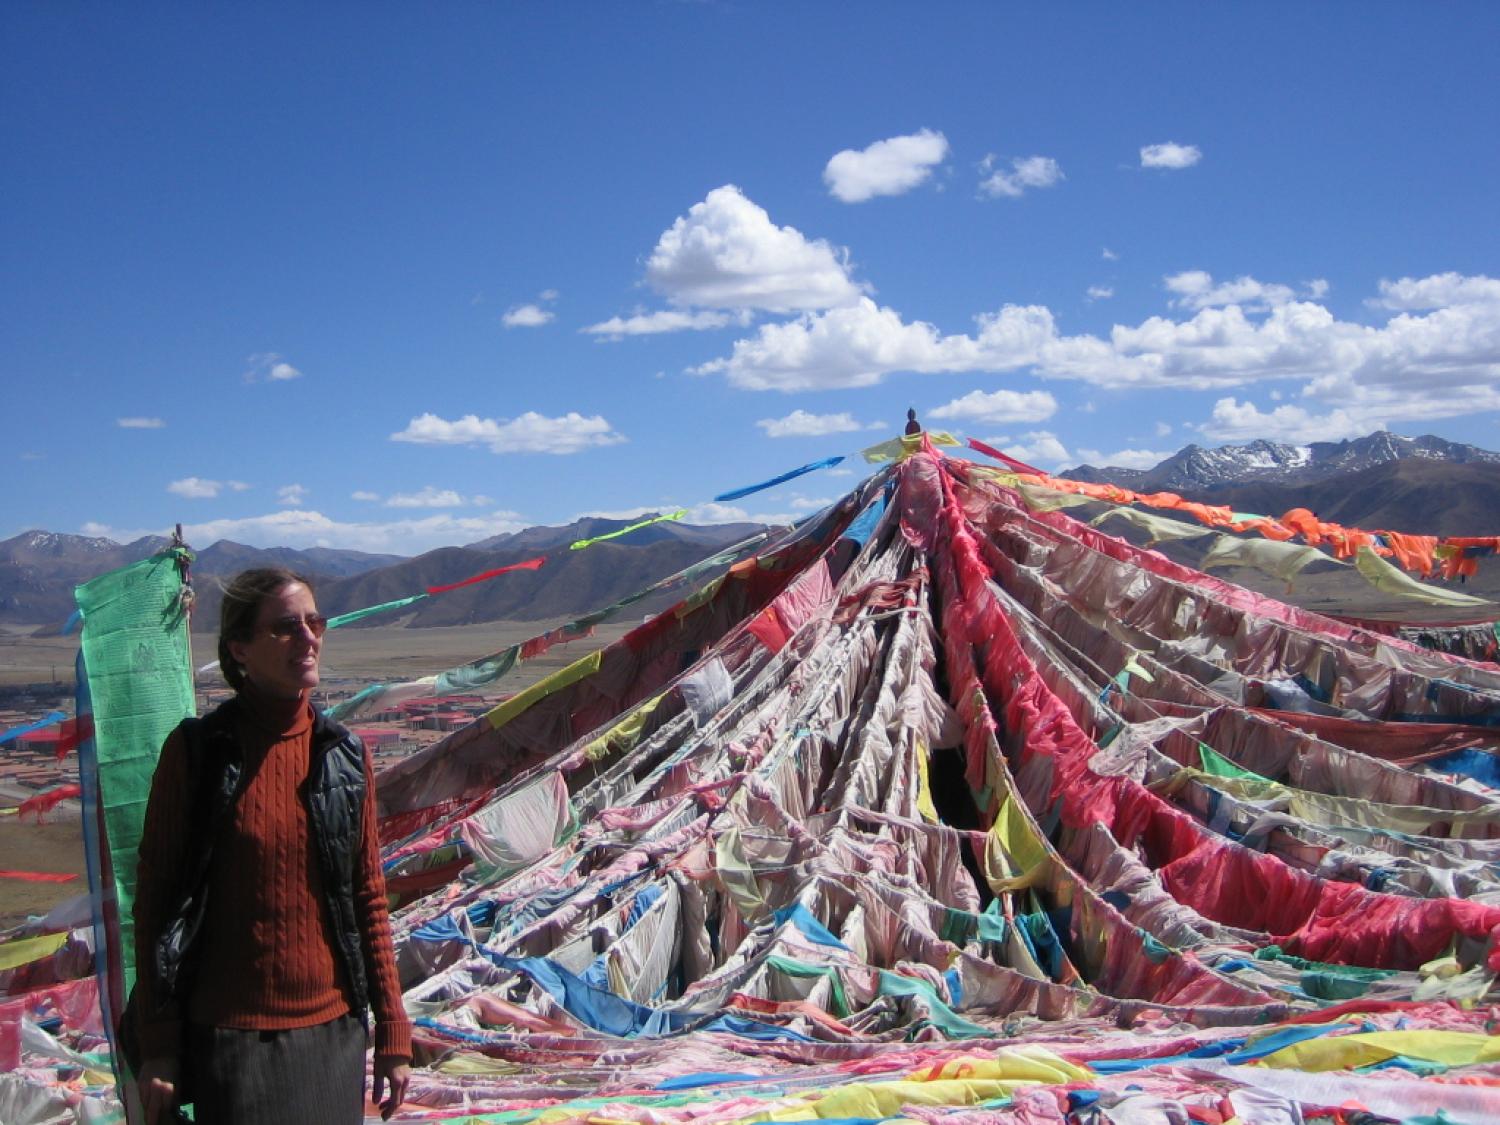 Holly Gayley, assistant professor of religious studies at CU-Boulder, takes in the view near the Amne Machen Range in Tibet. Photo courtesy of Holly Gayley.